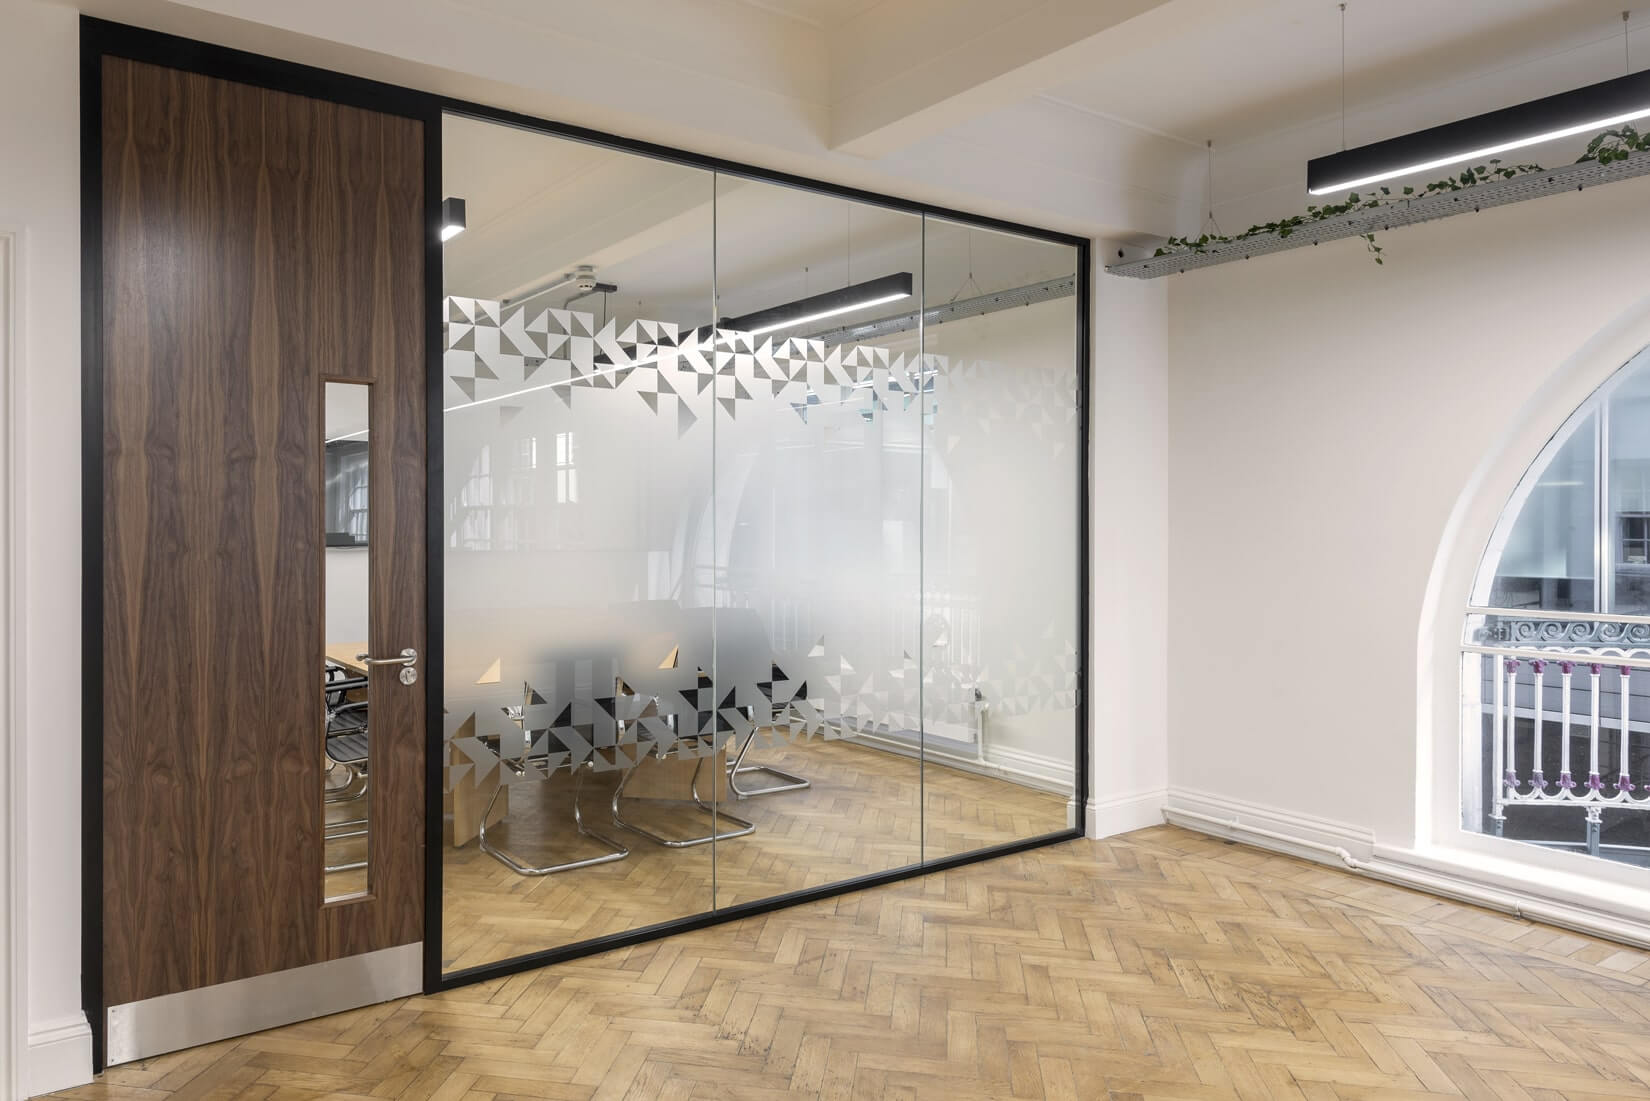 Thin glass partitioning